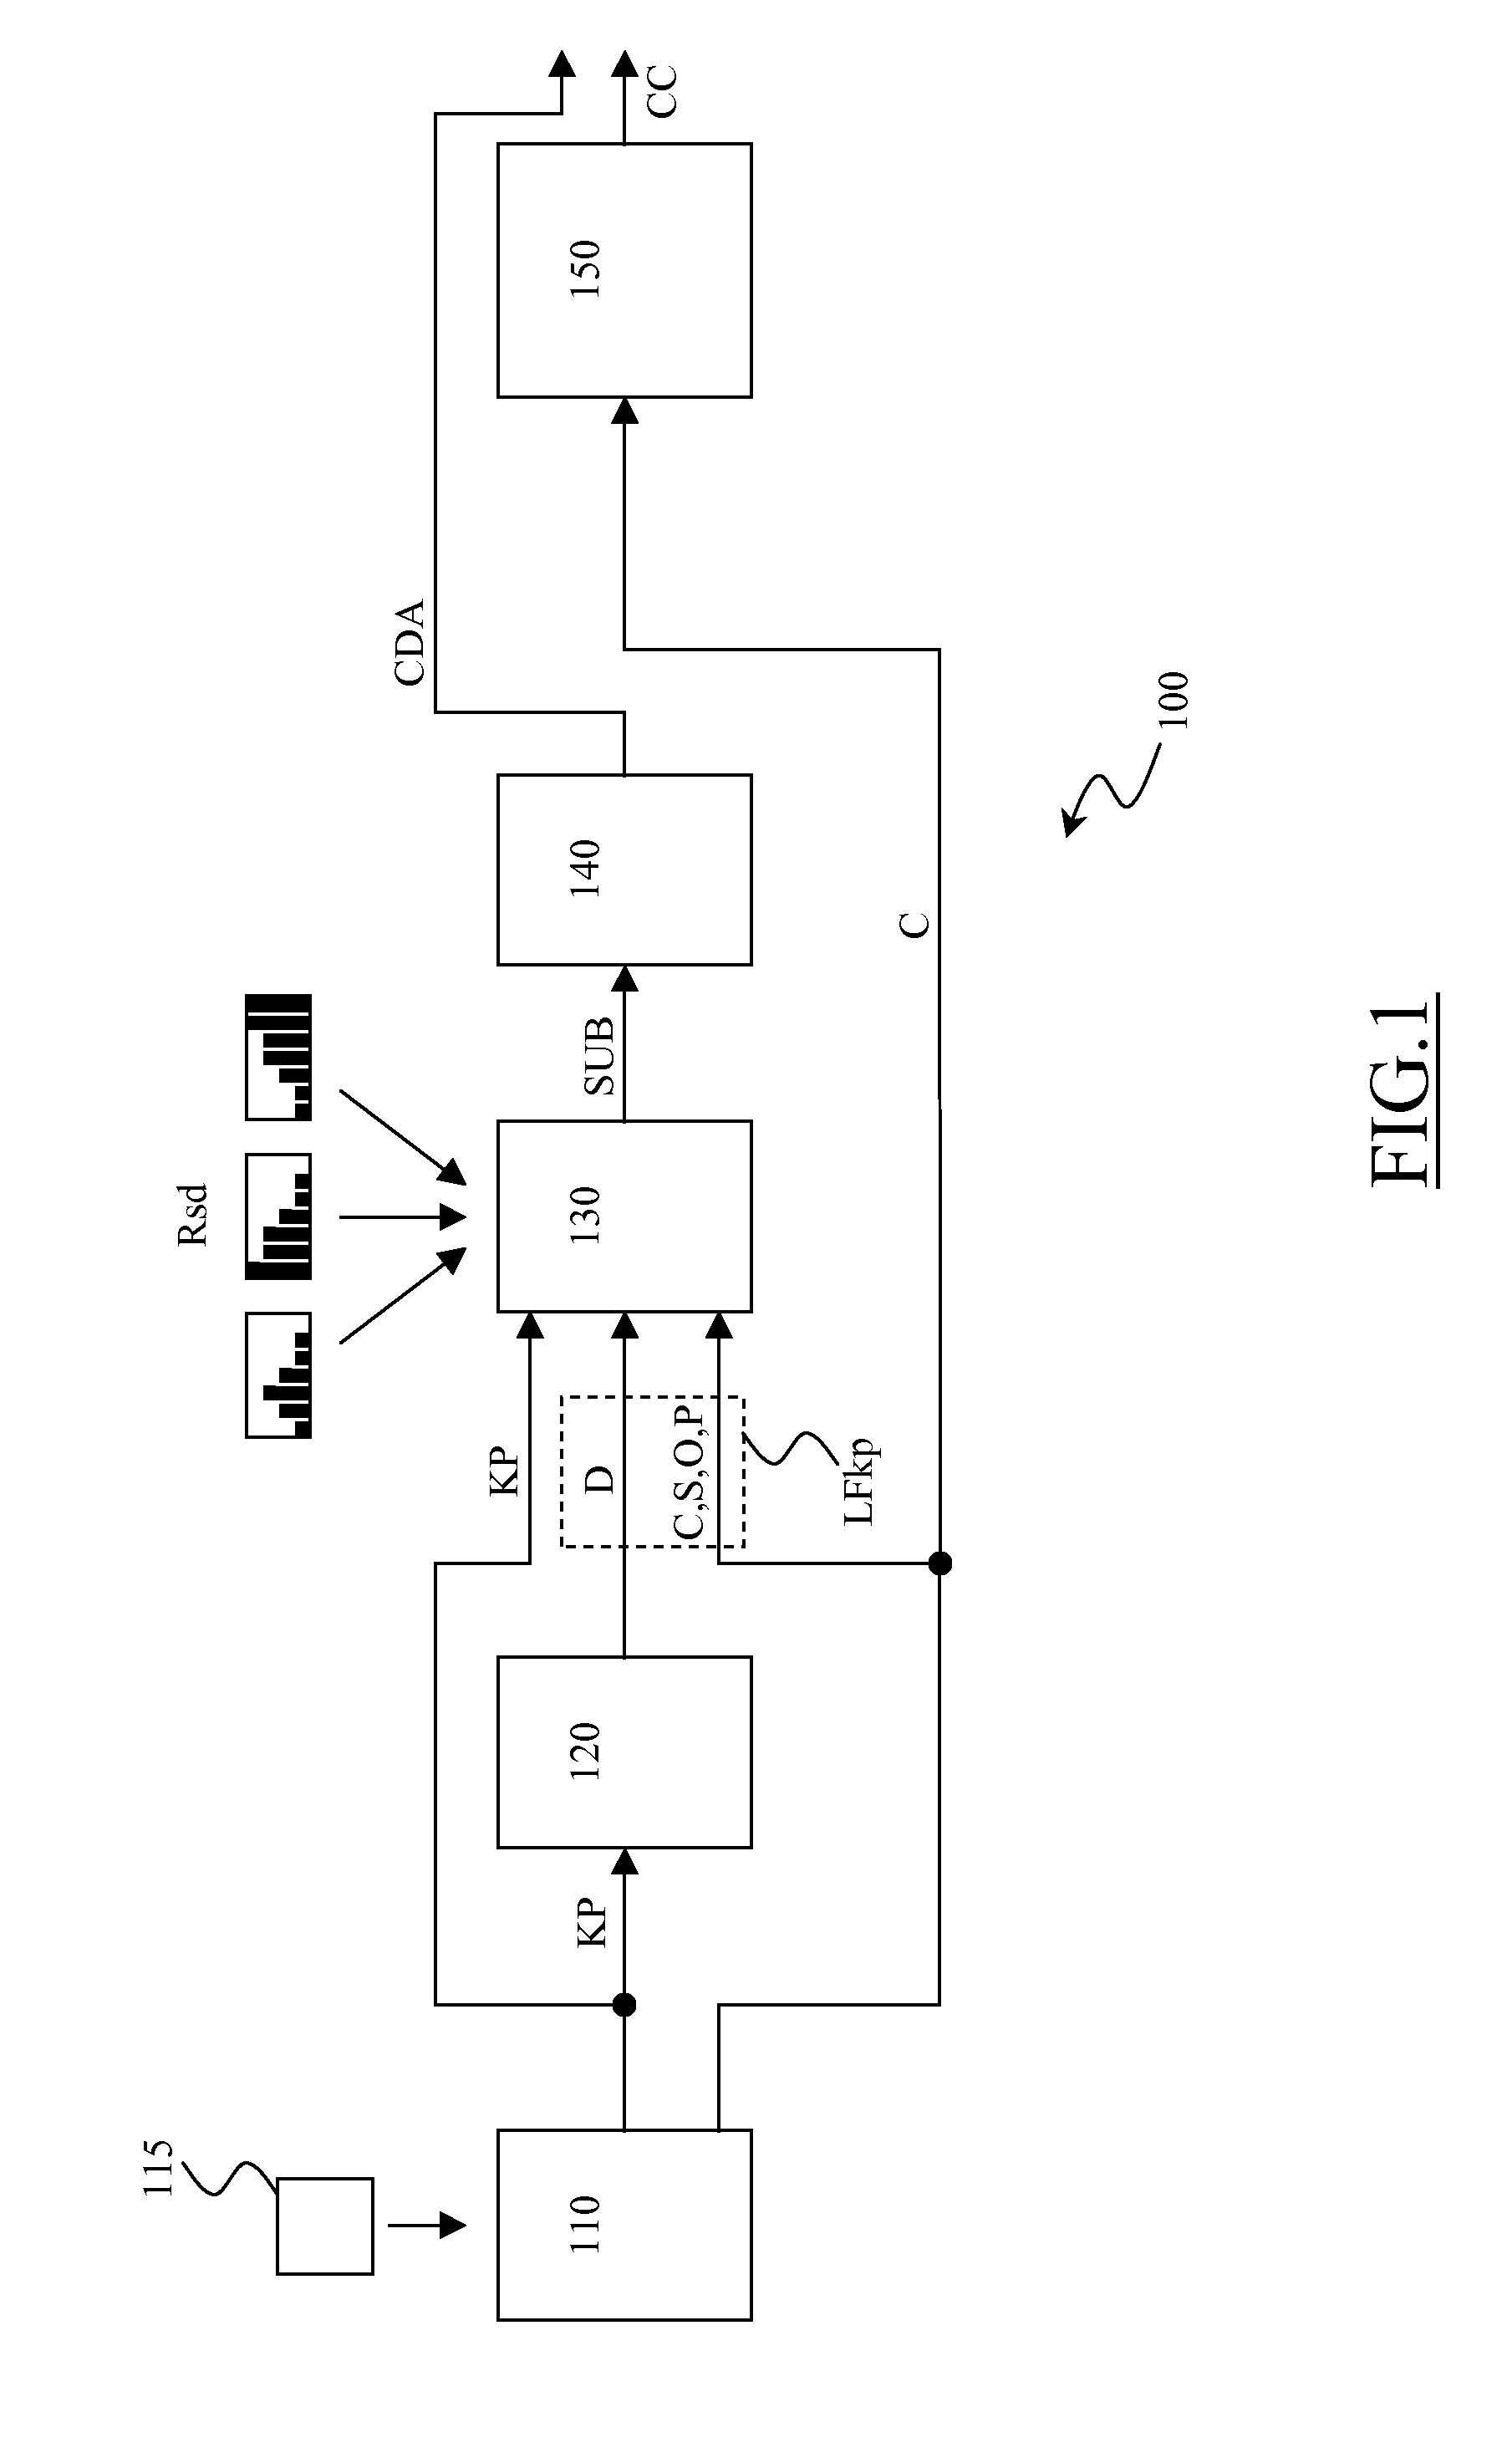 Method and system for image analysis